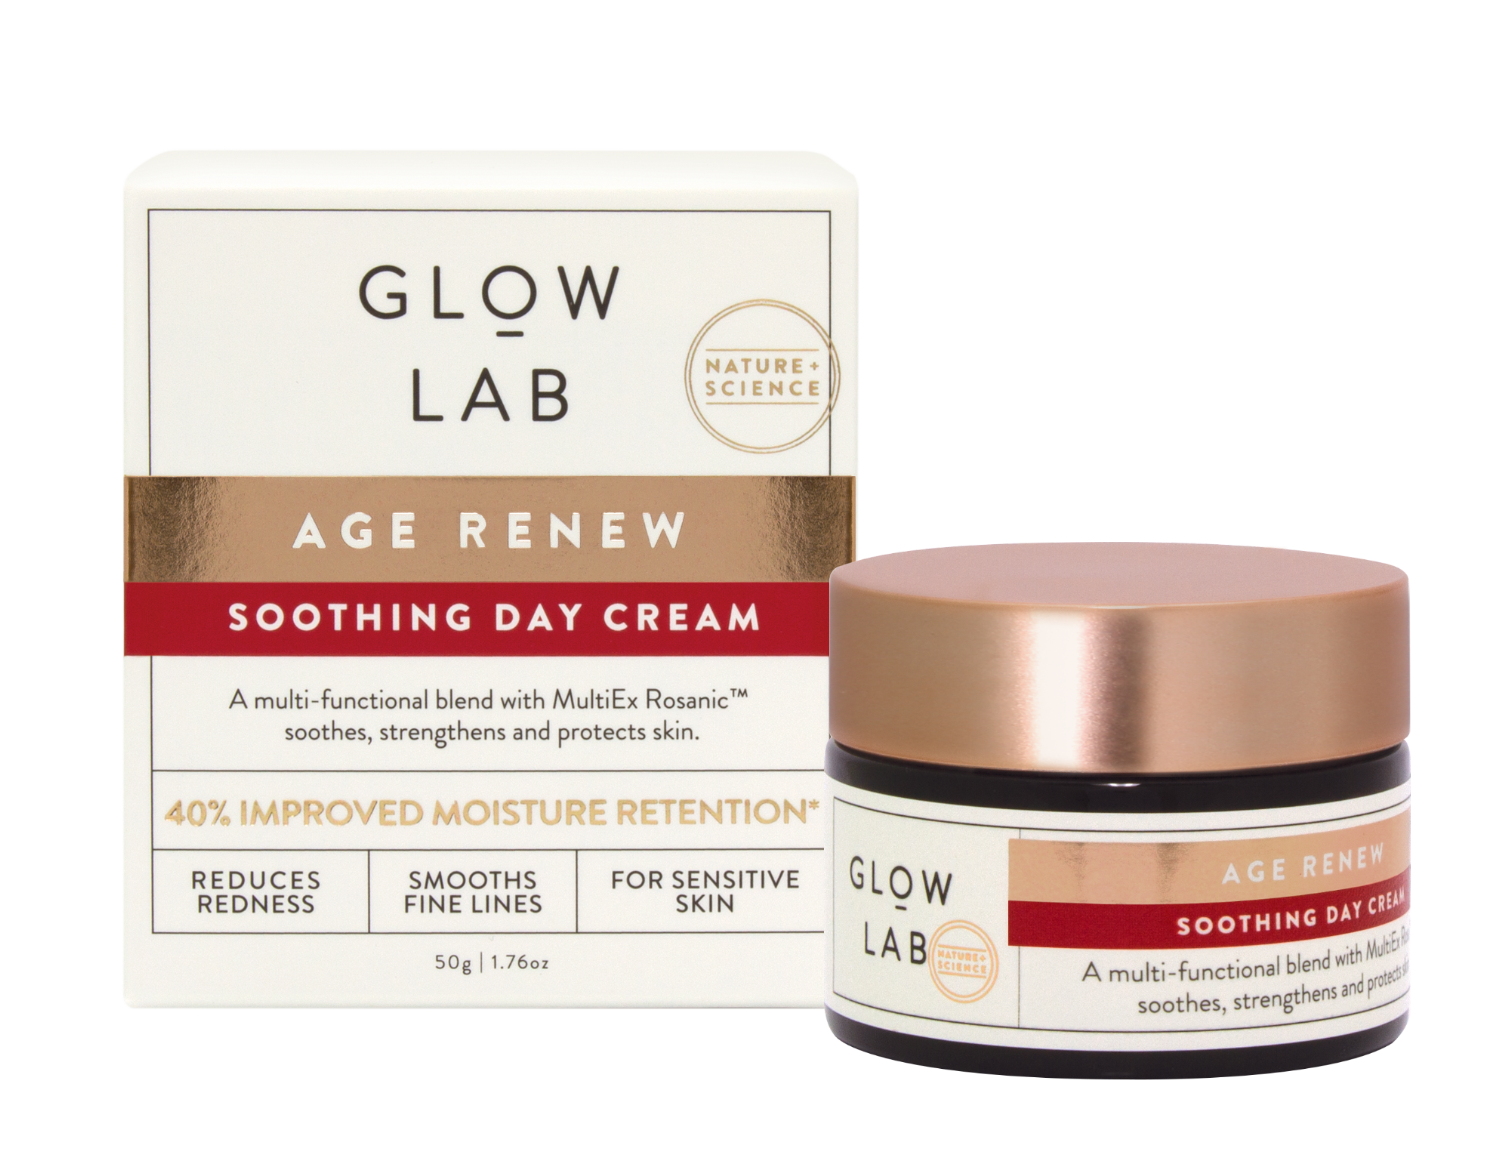 Age Renew Soothing Day Cream